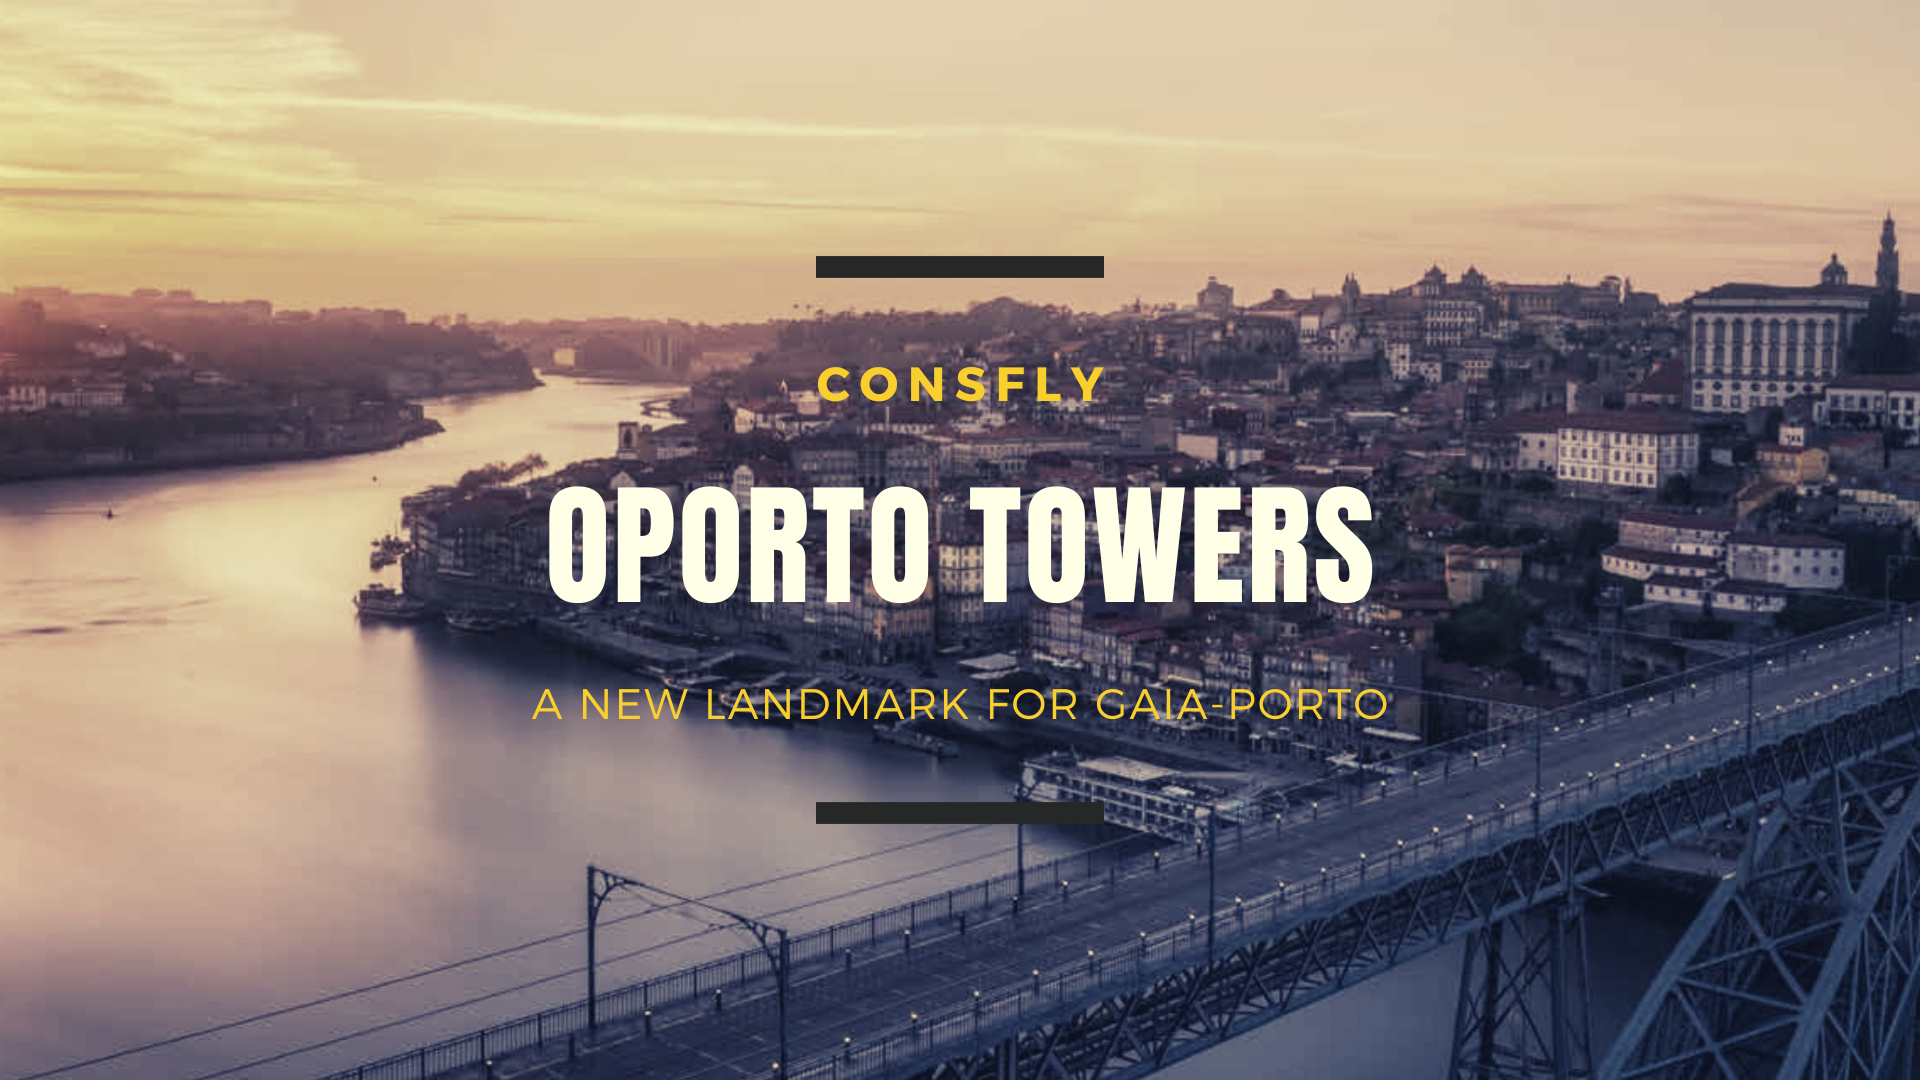 Presentation for the Oporto Towers property project